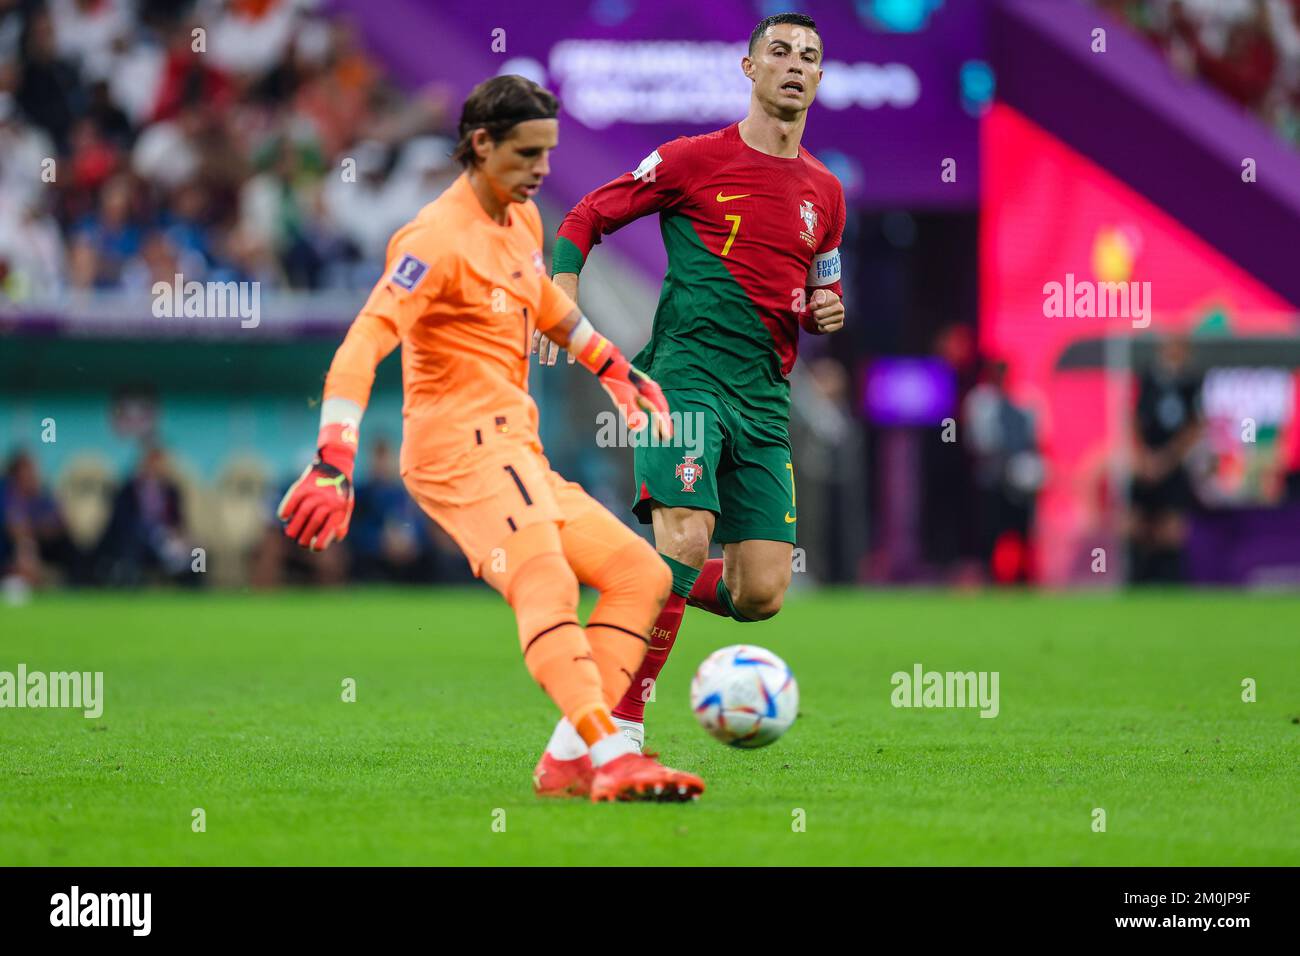 Doha, Qatar. 06th Dec, 2022. Cristiano Ronaldo player of Portugal during a match against Switzerland valid for the round of 16 of the FIFA World Cup at Lusail Stadium, in Doha, Qatar. December 06, 2022 Credit: Brazil Photo Press/Alamy Live News Stock Photo